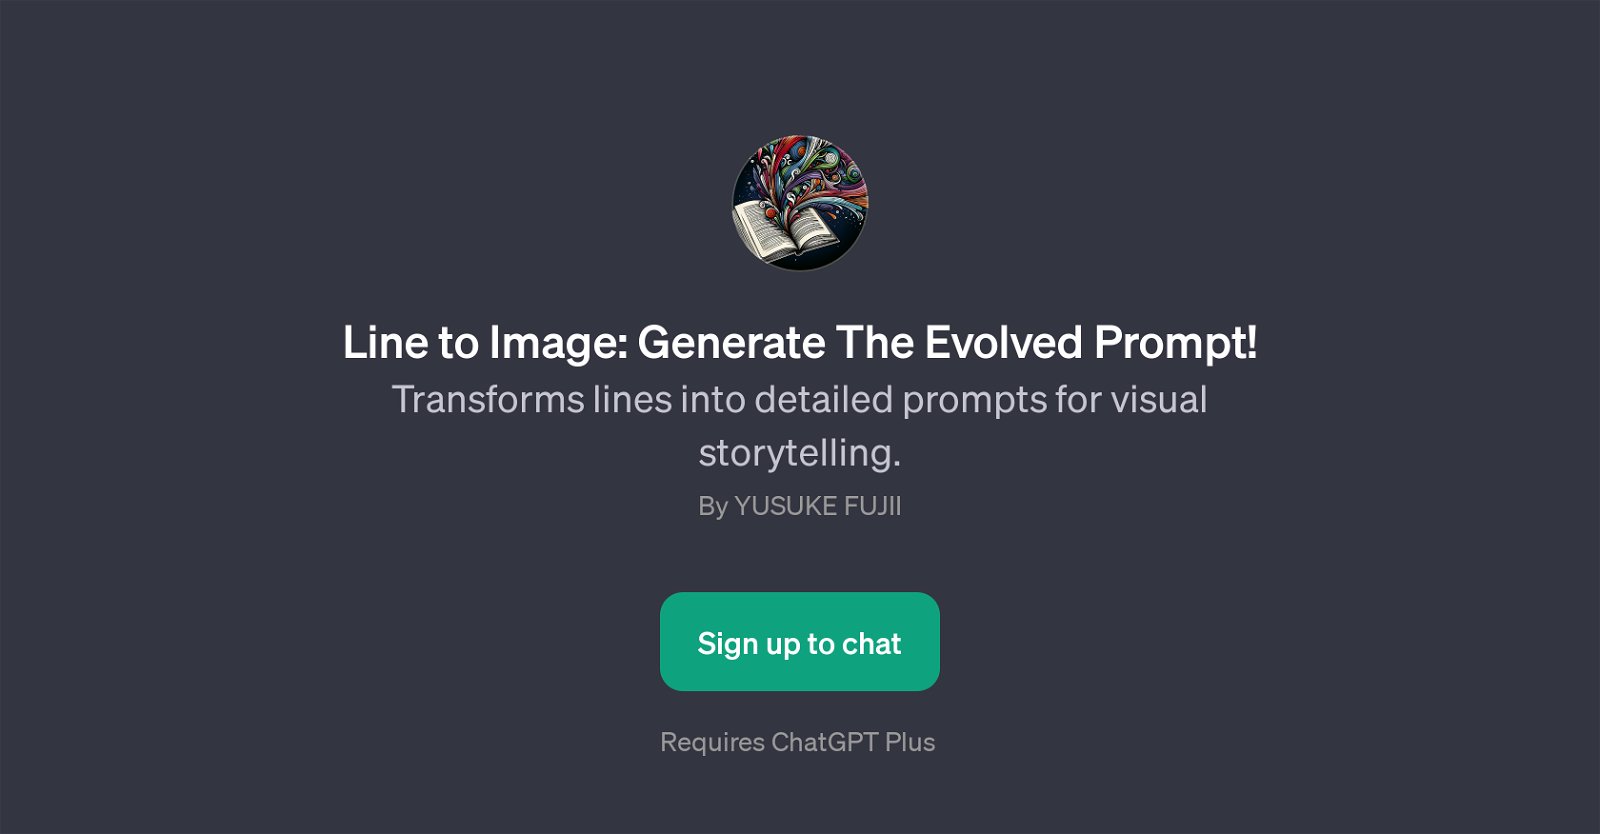 Line to Image: Generate The Evolved Prompt website